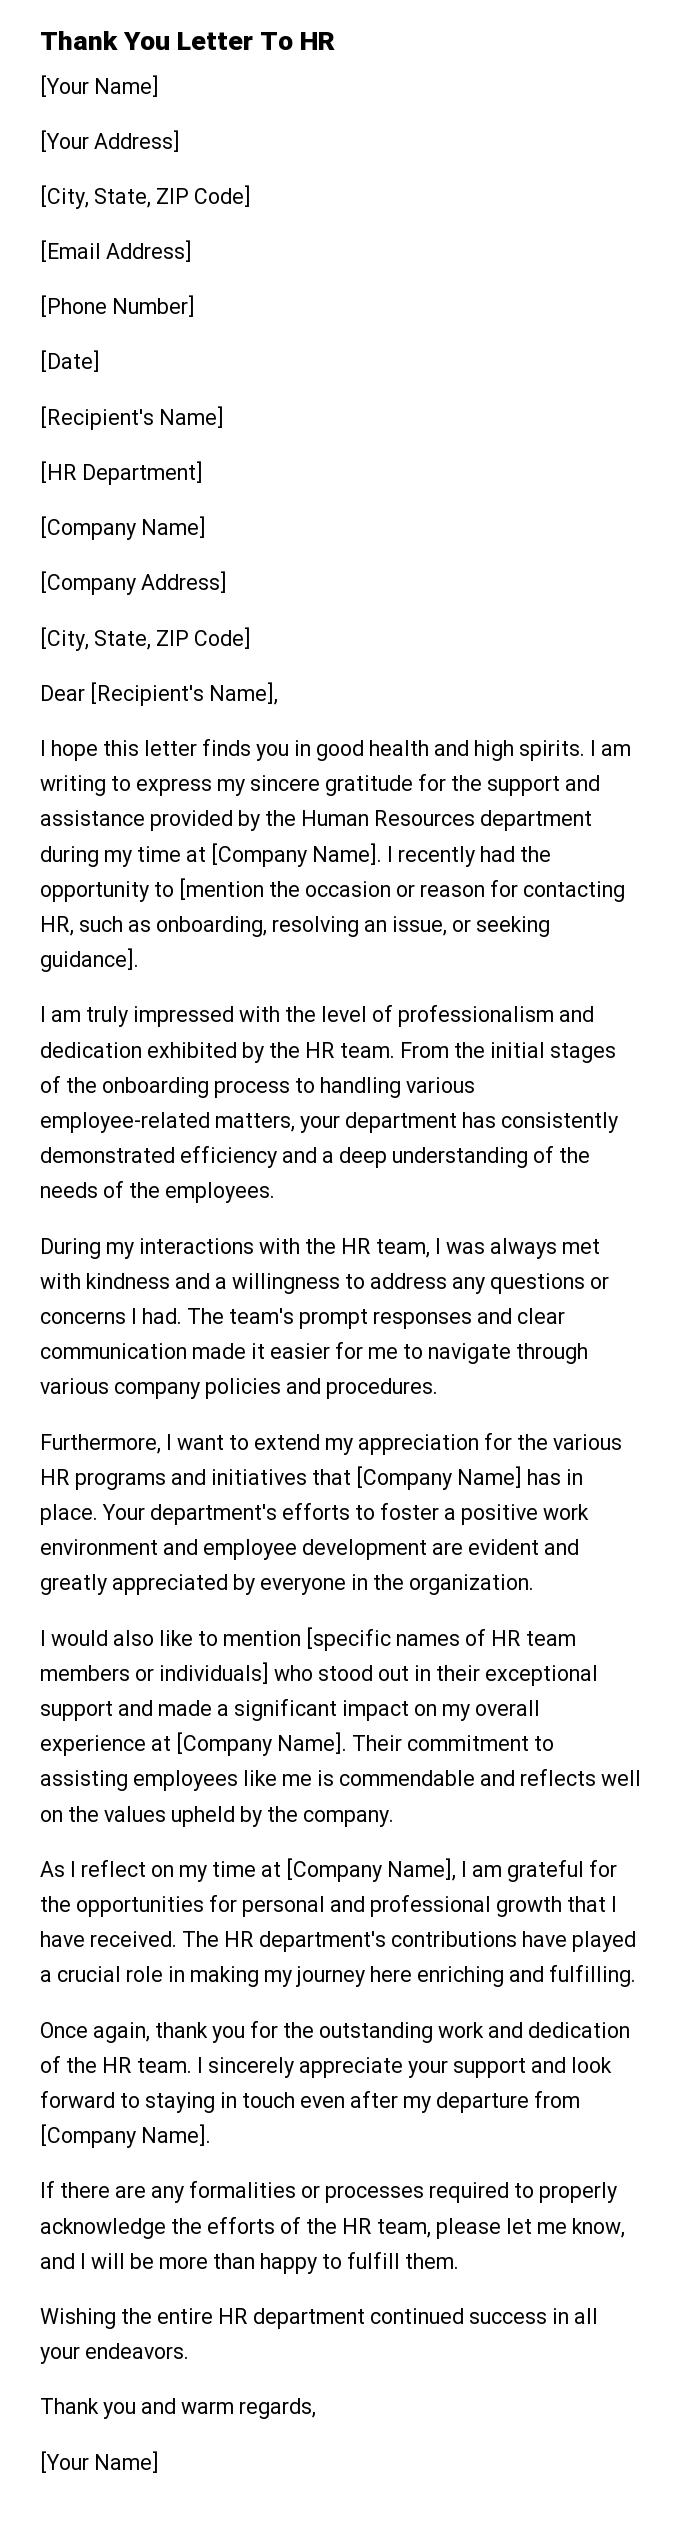 Thank You Letter To HR